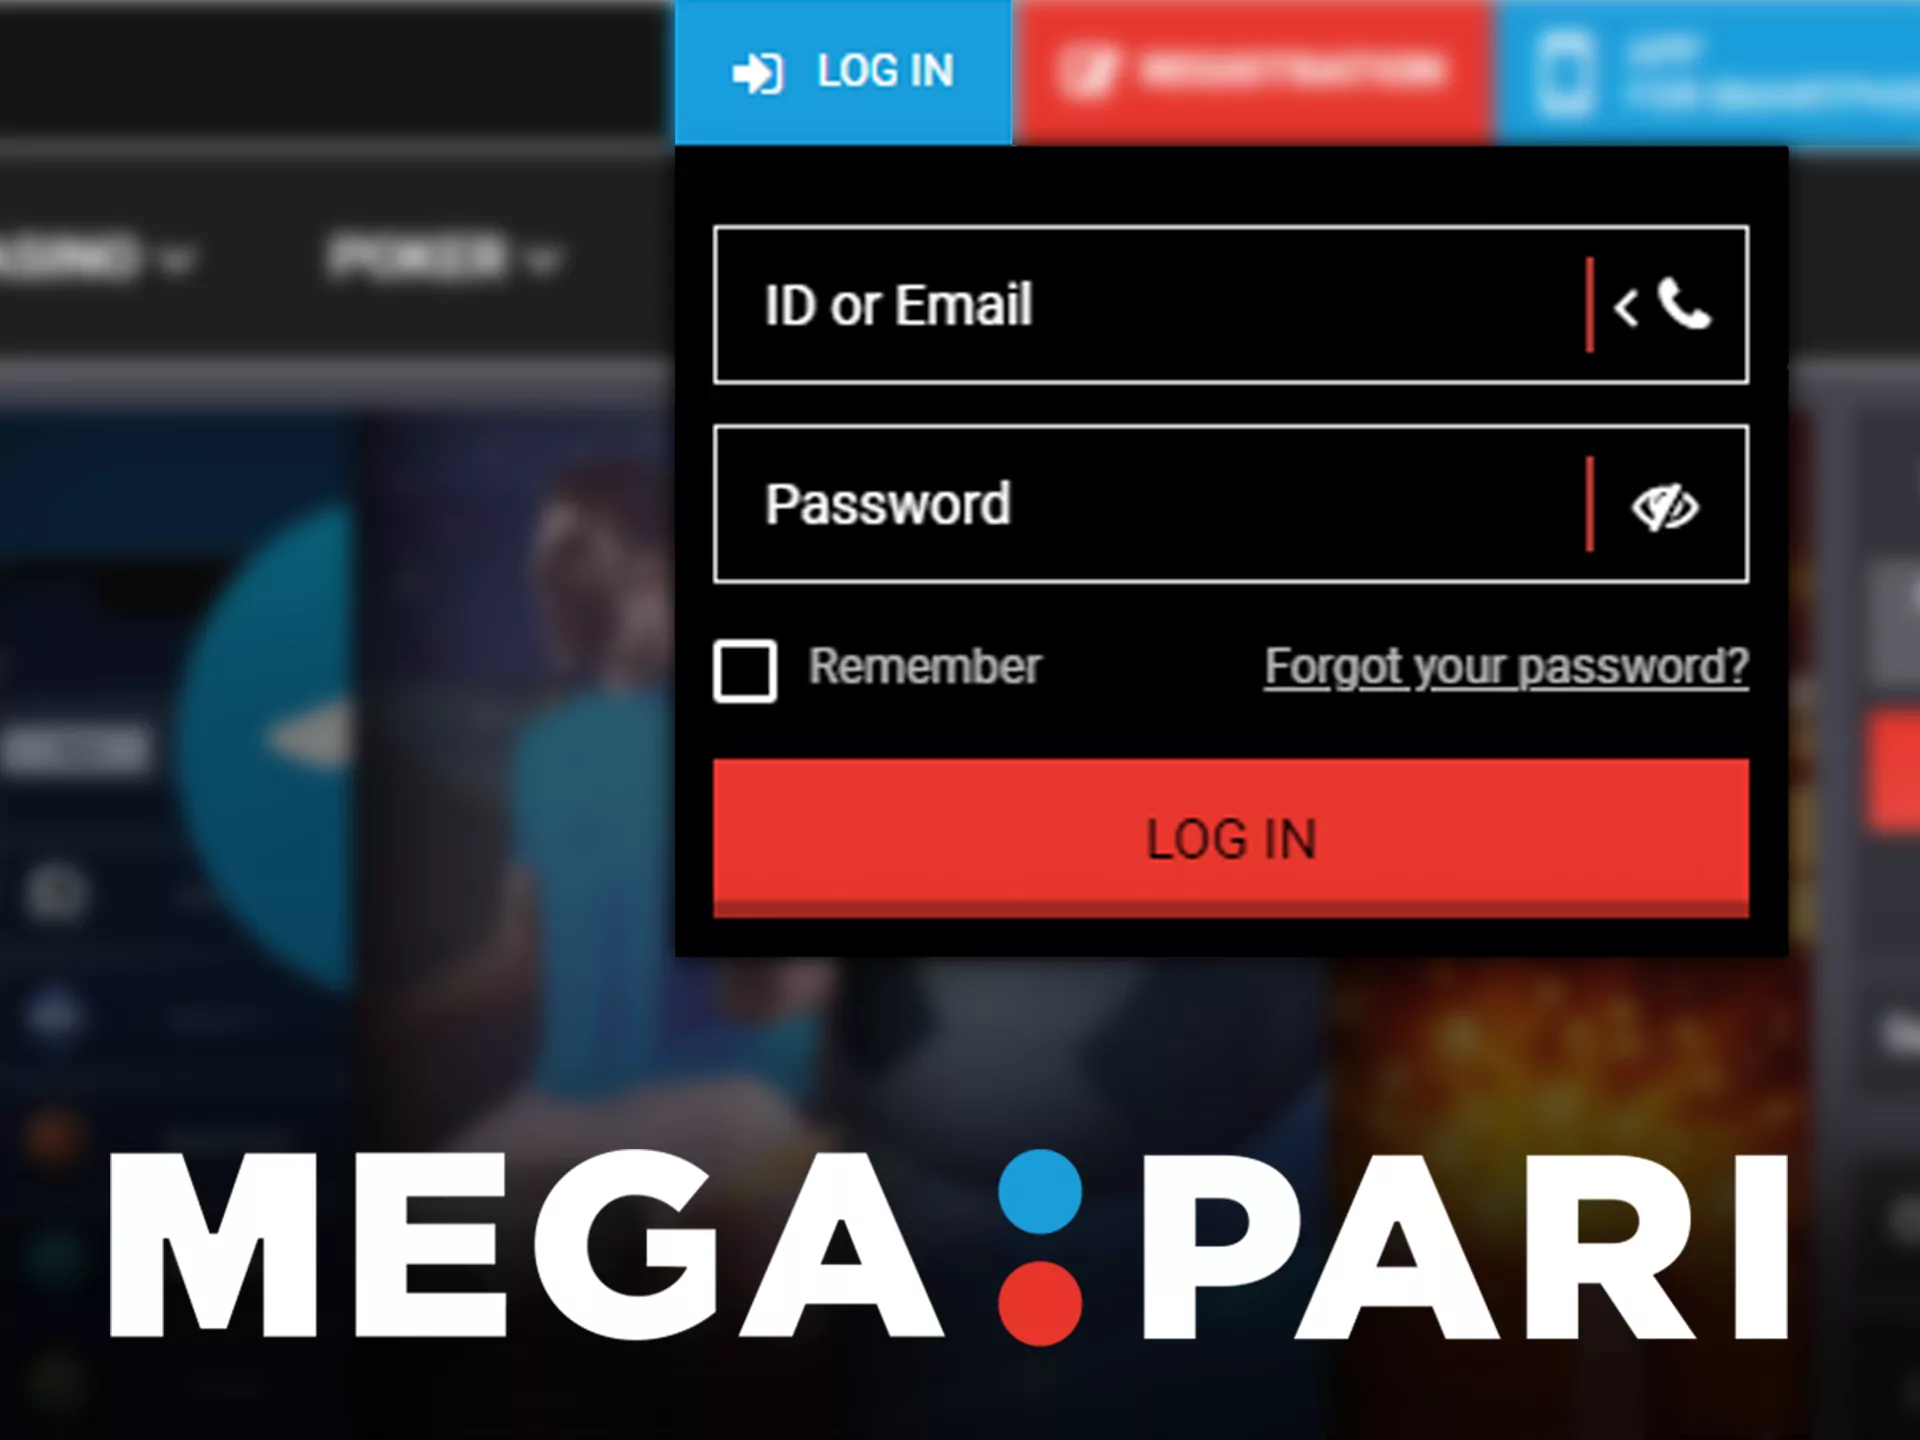 Use your username and password to enter the Mega Pari account.